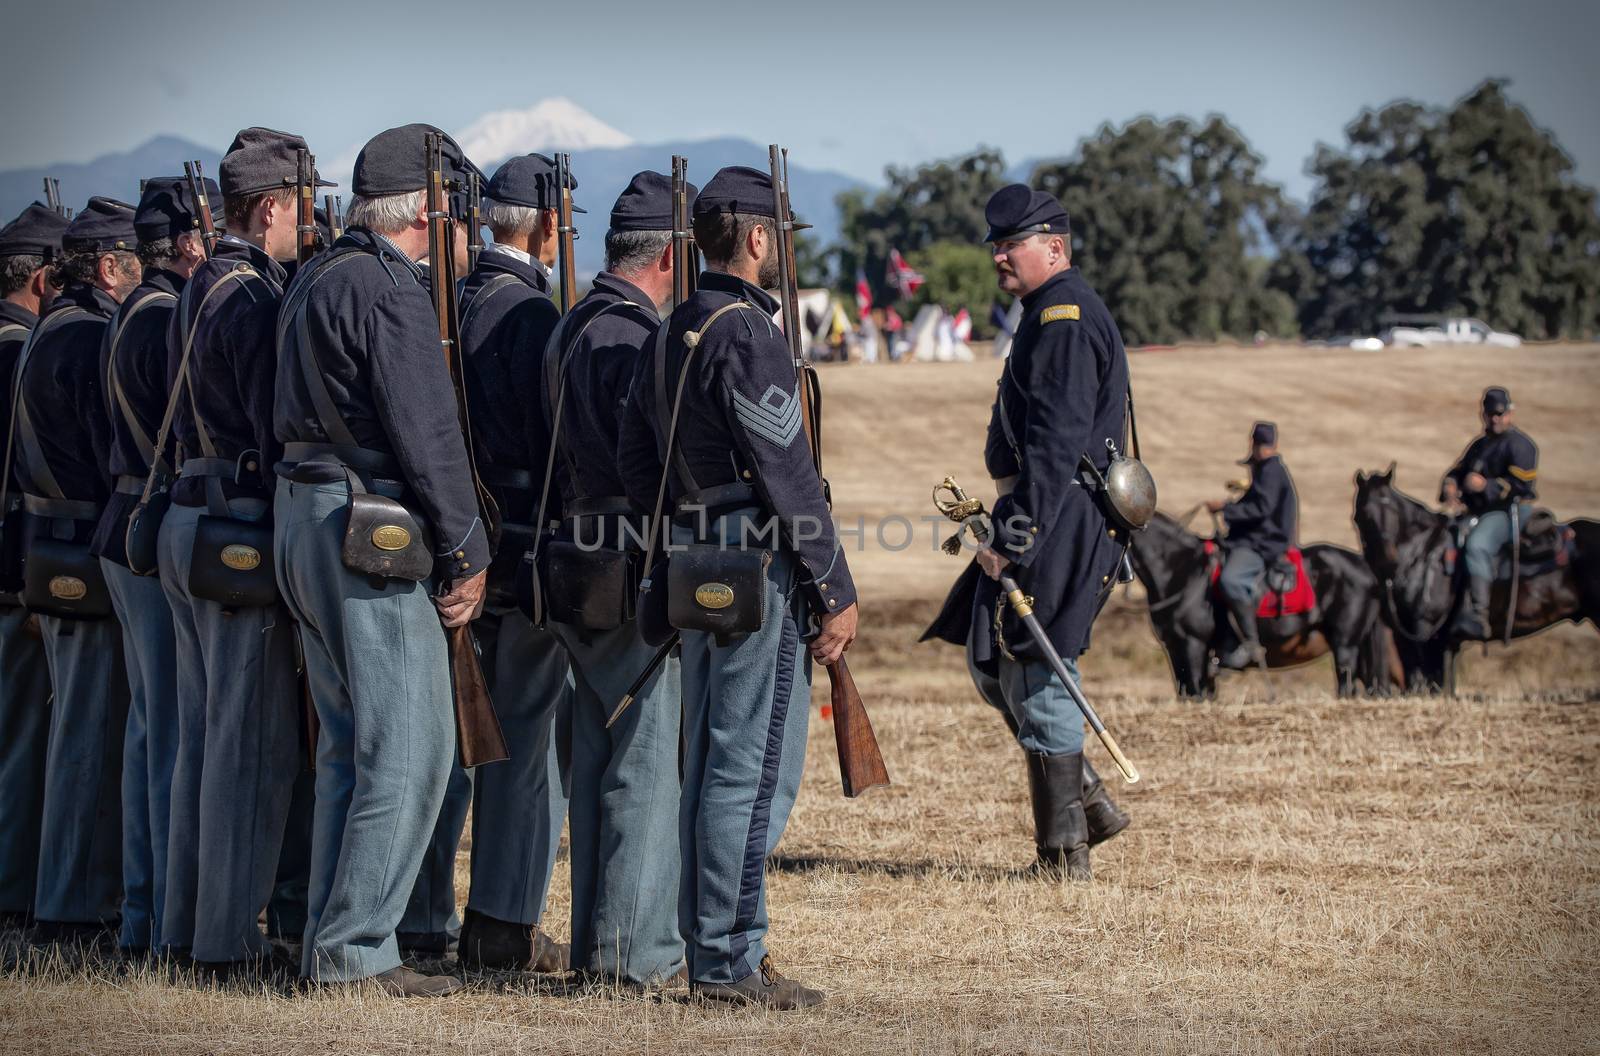 Anderson, California, United States-September 27, 2014: Members of the Union's 72nd New York get ready during a Civil War reenactment.